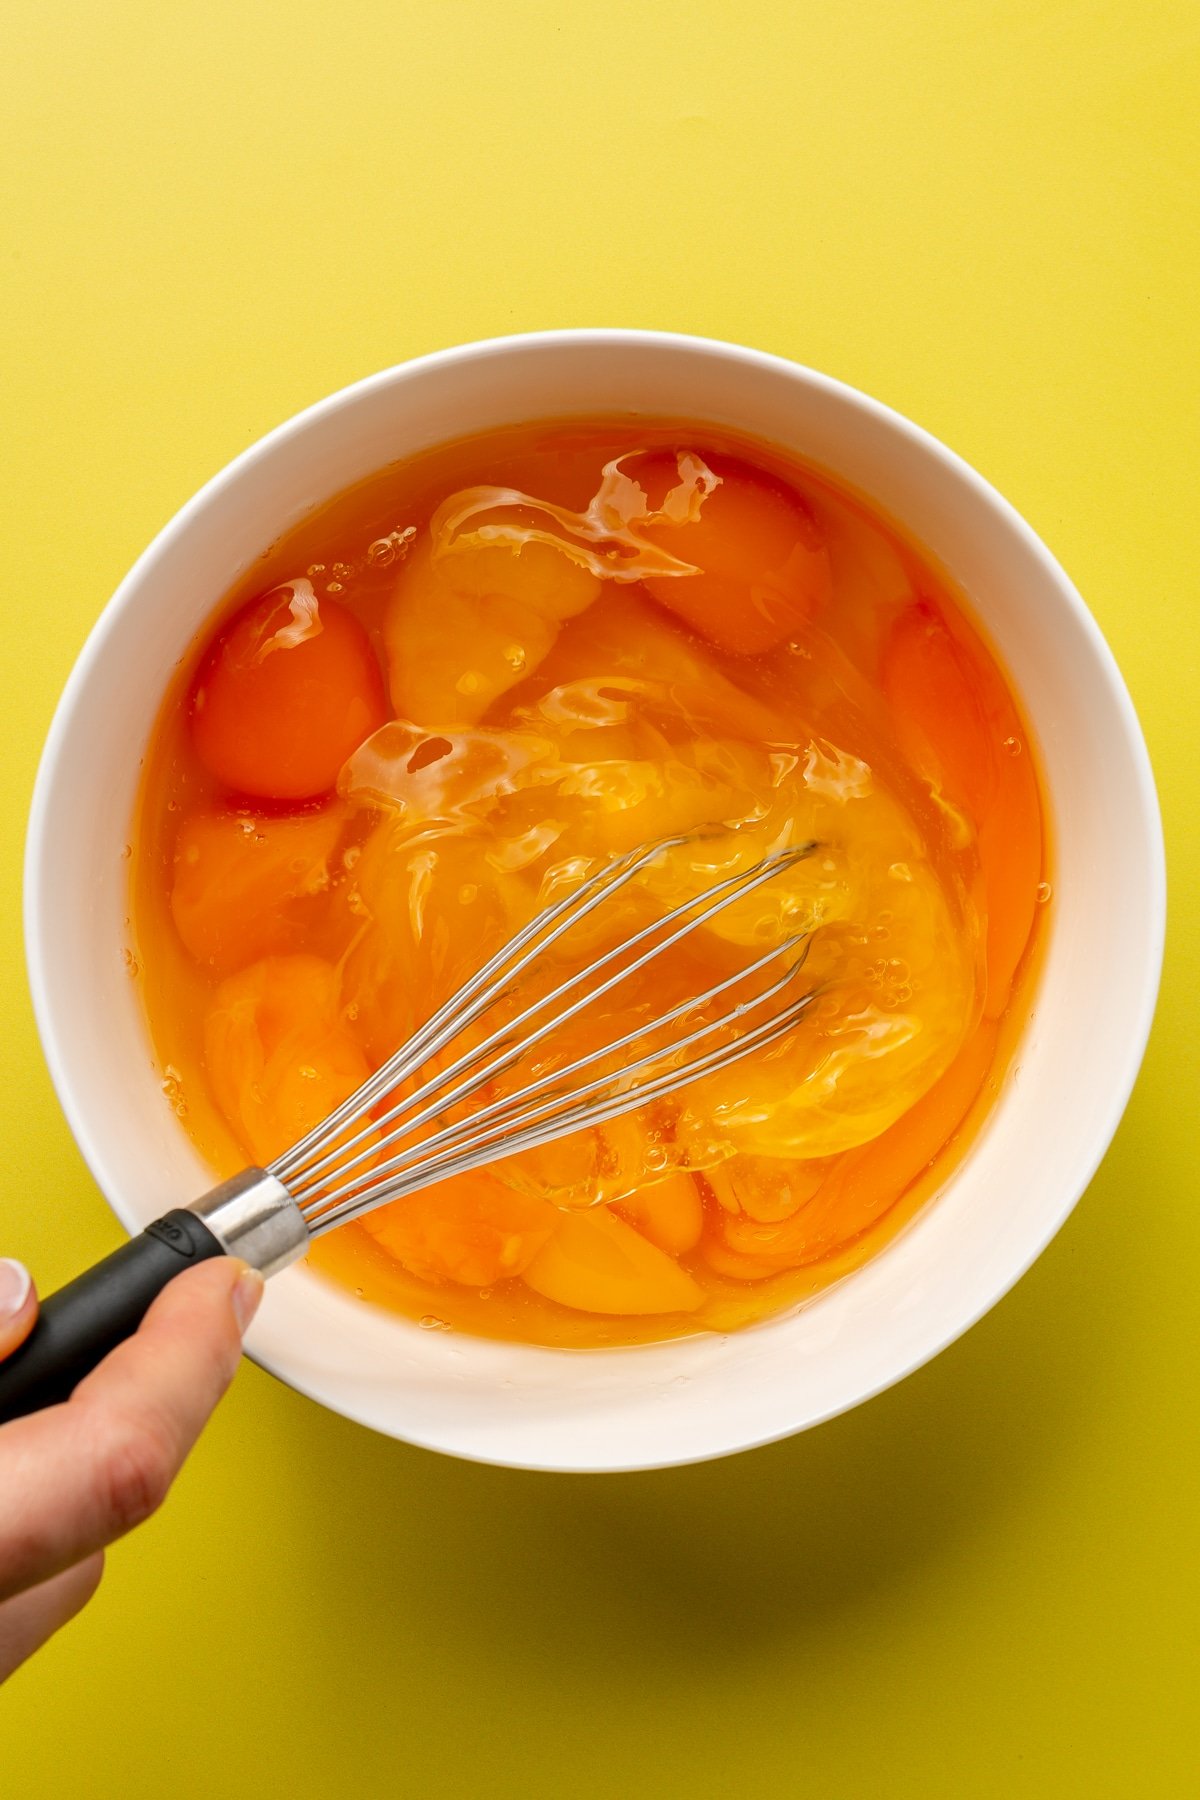 A bowl of eggs are shown being whisked together with a black whisk.